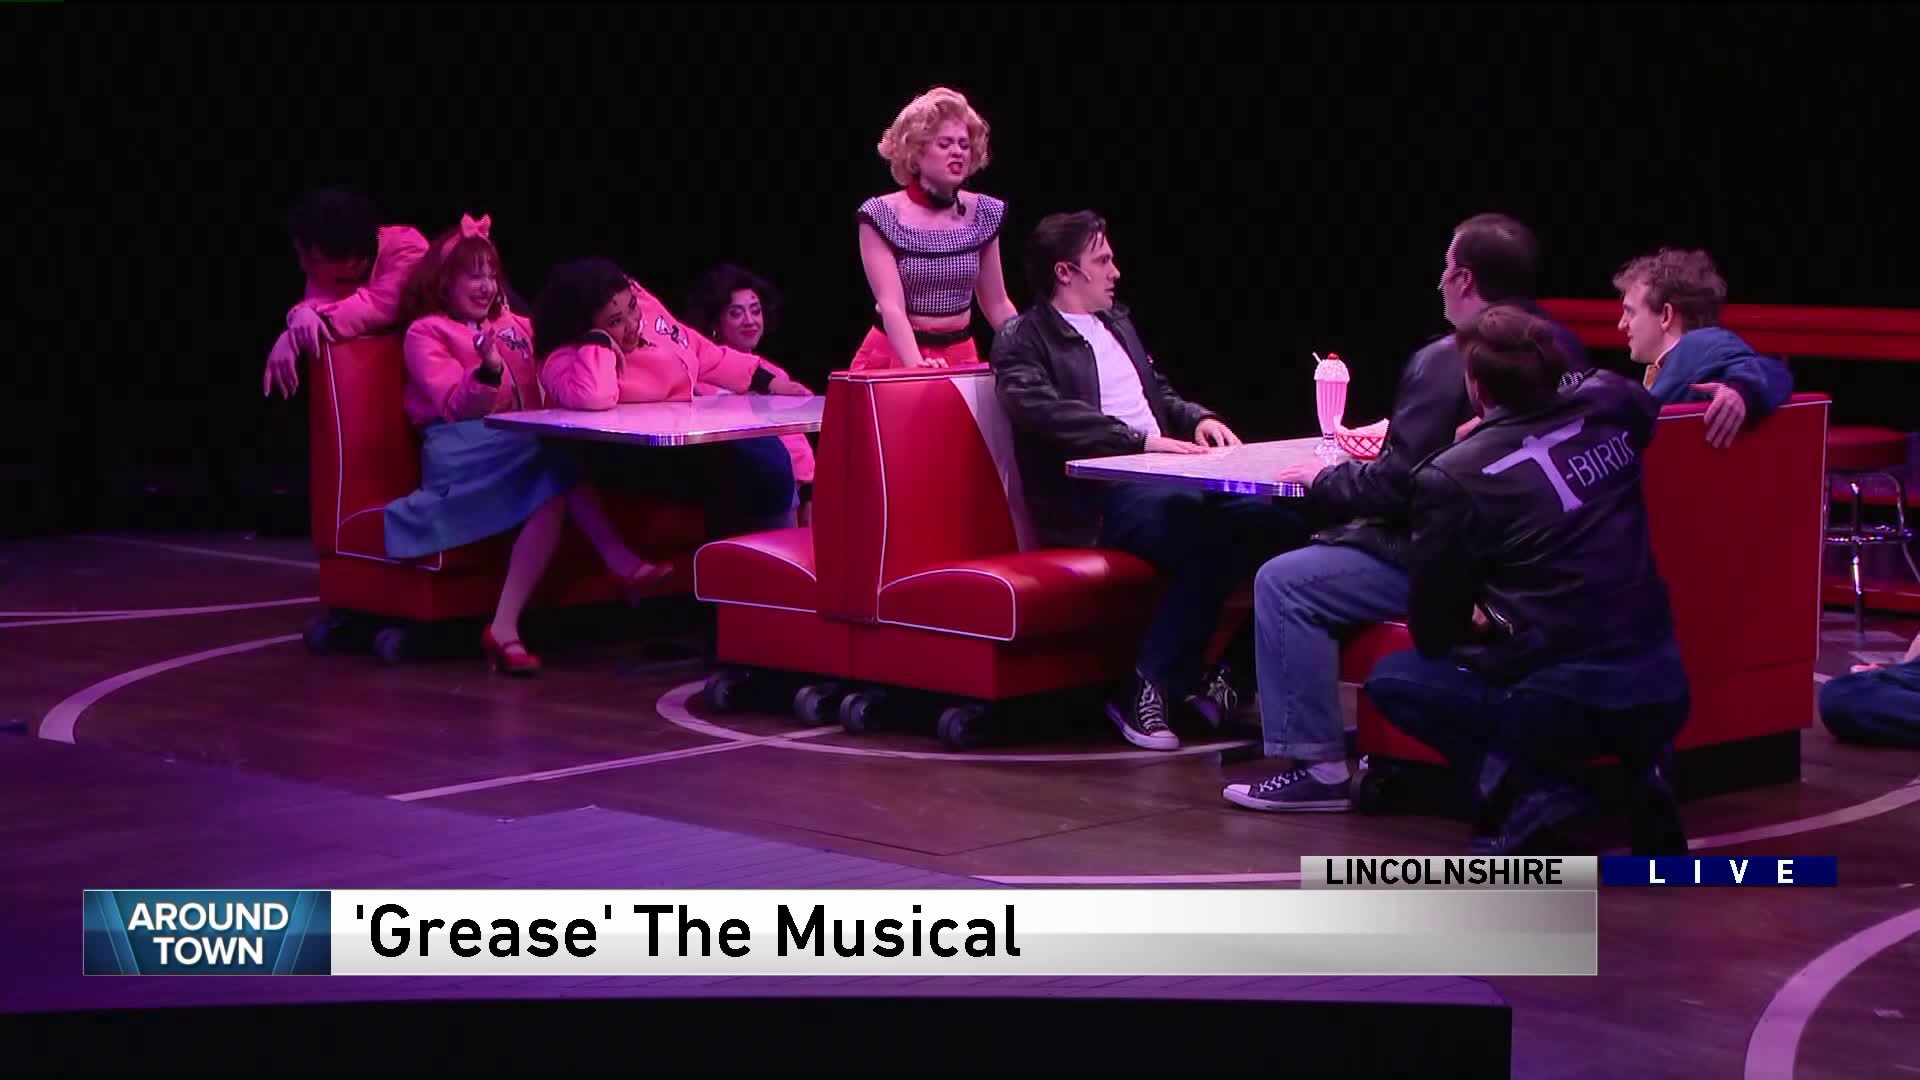 Around Town previews ‘Grease’ the musical